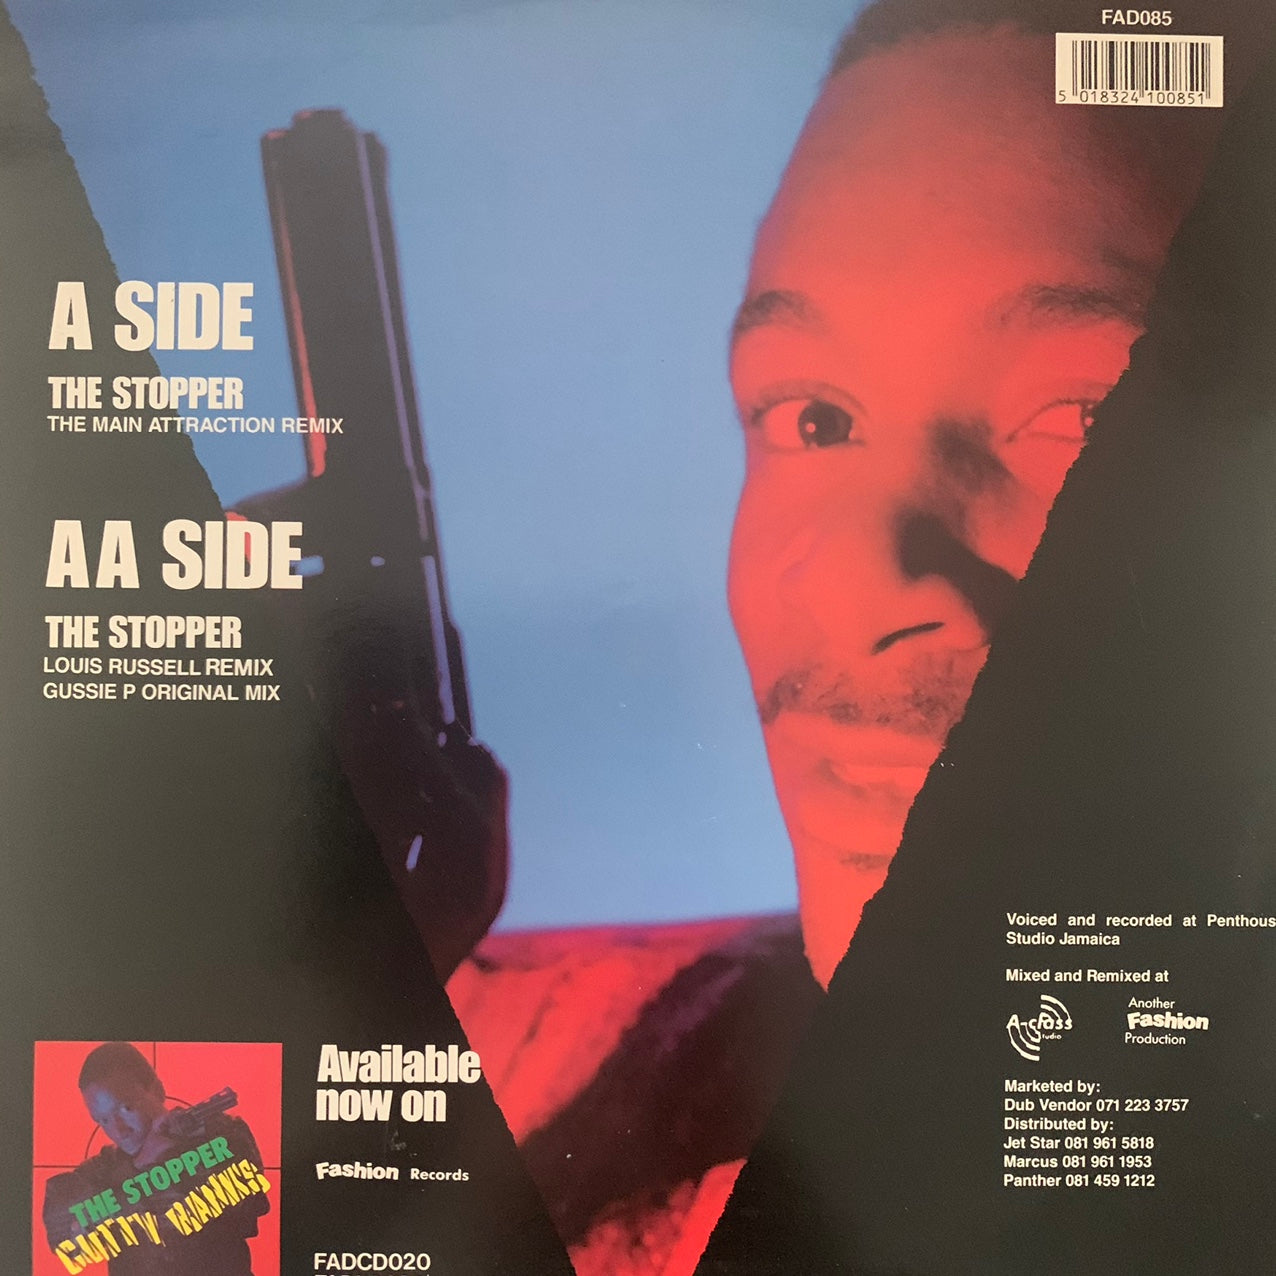 Cutty Ranks “The Stopper” Includes Main Attraction Remix, Louis Russell Remix and the Gussie P Original Mix 3 Version 12inch Vinyl